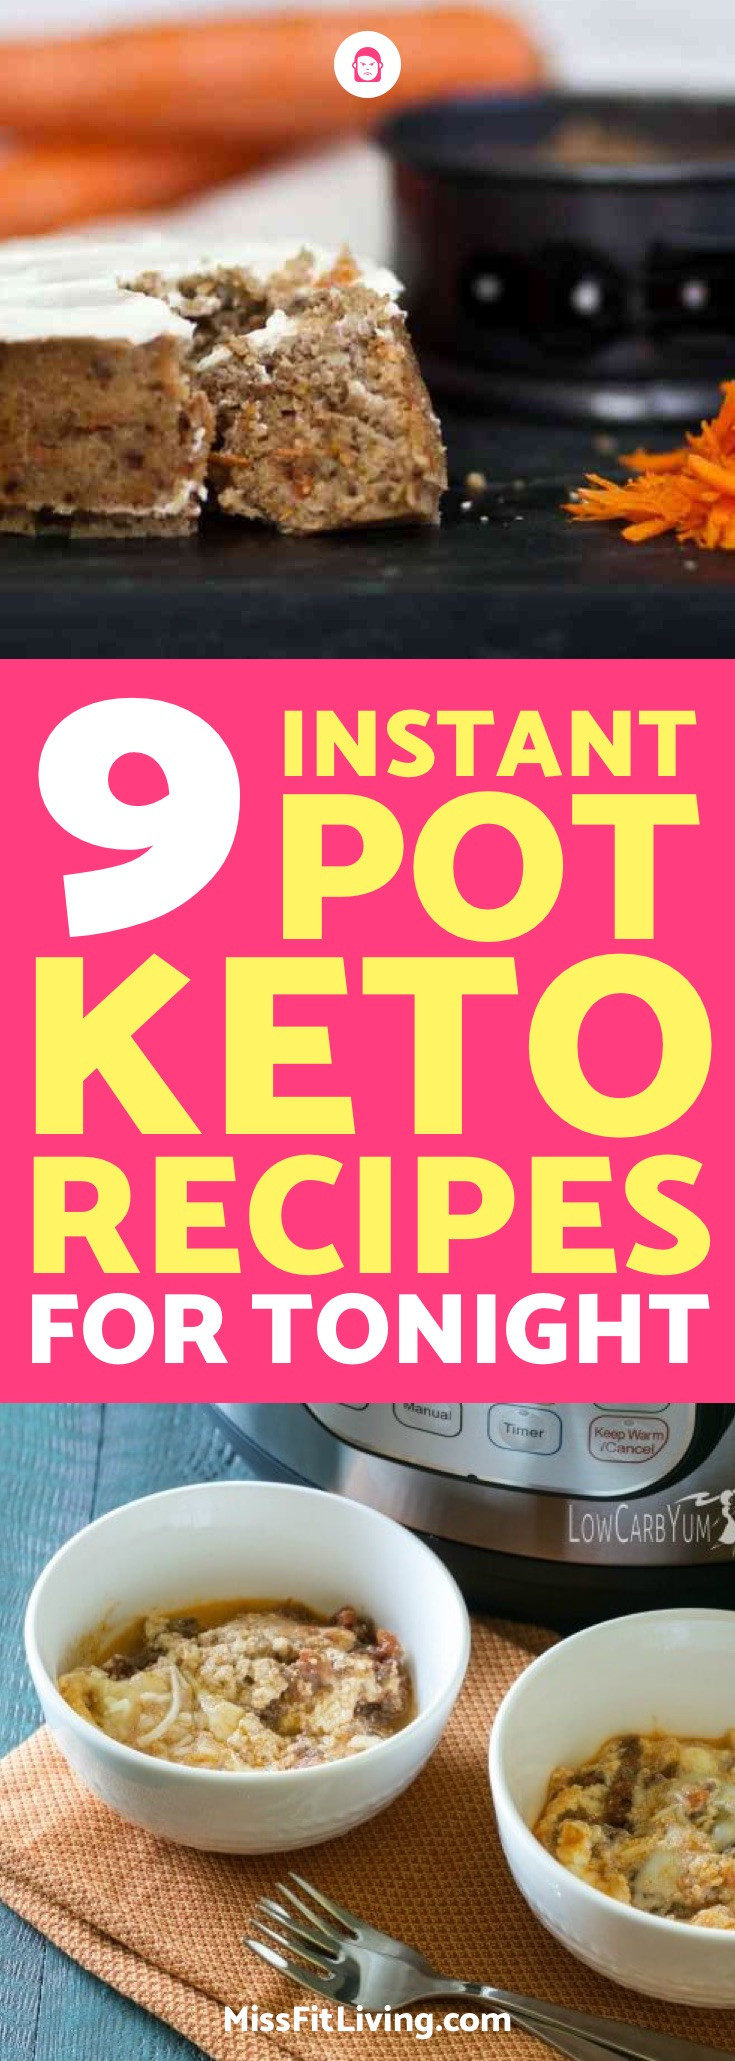 Keto Diet Instant Pot
 9 Instant Pot Keto Recipes To Try Tonight While Doing the